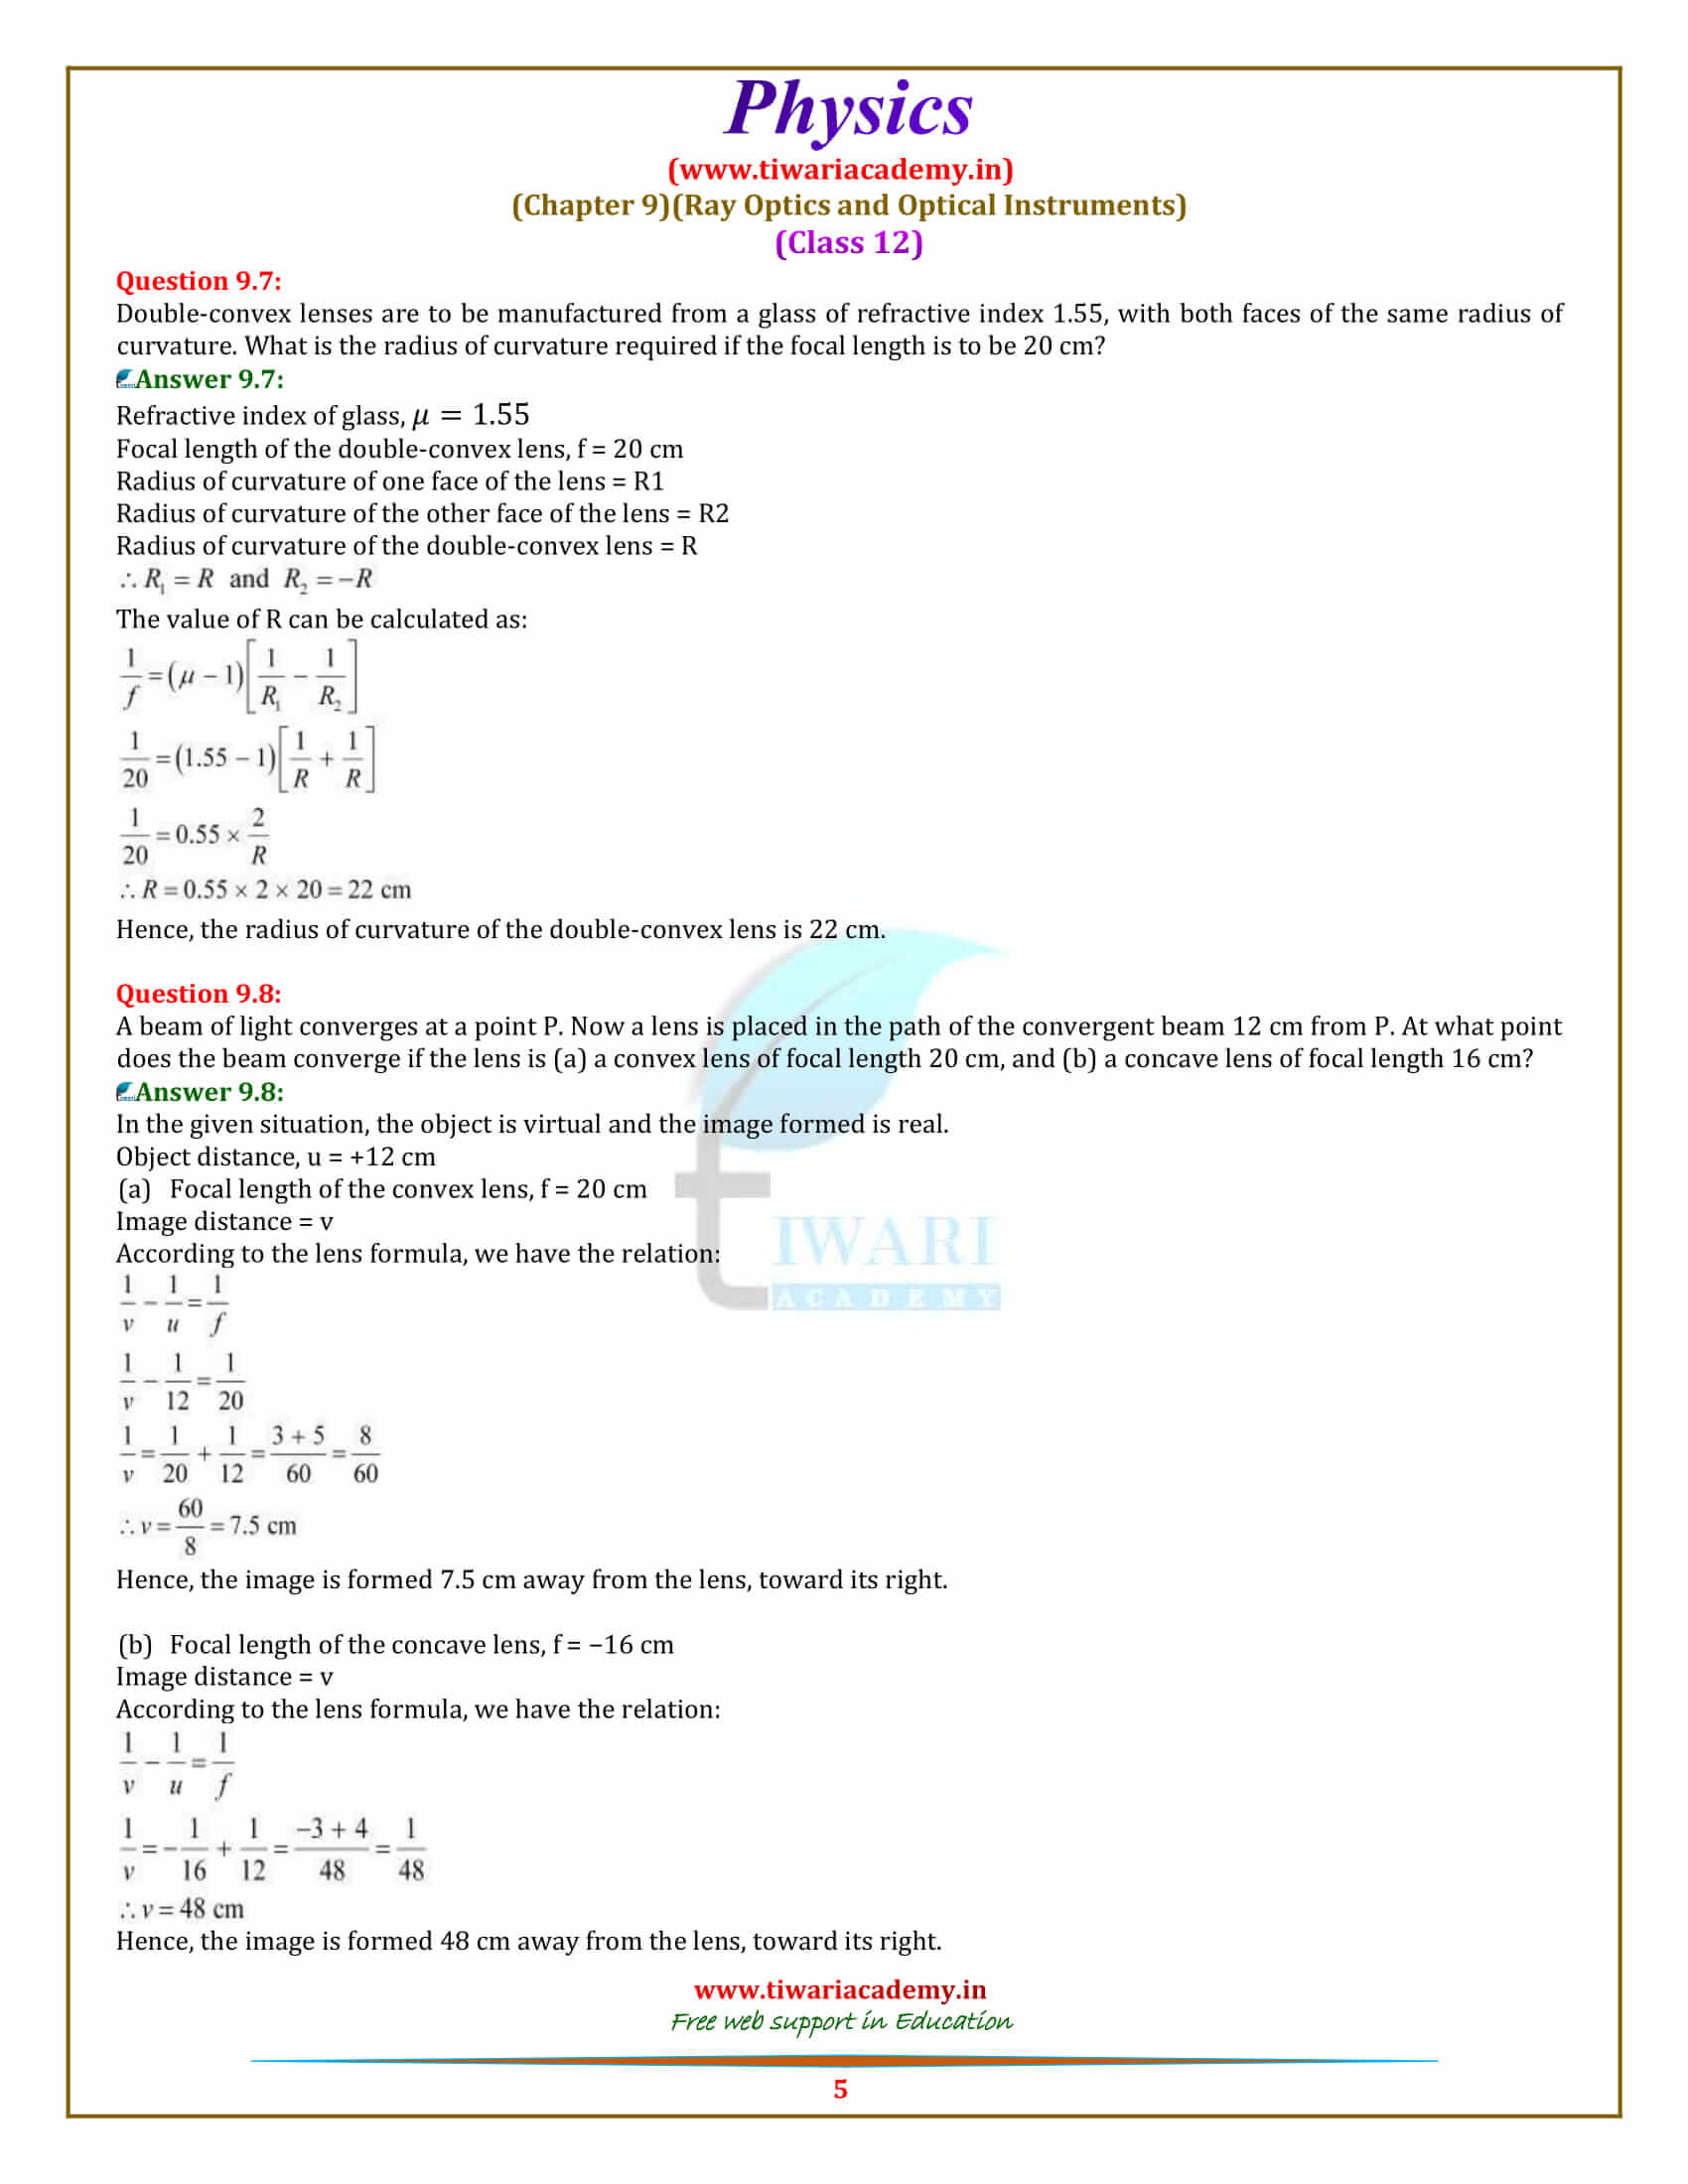 NCERT Solutions for Class 12 Physics Chapter 9 Ray Optics in pdf form